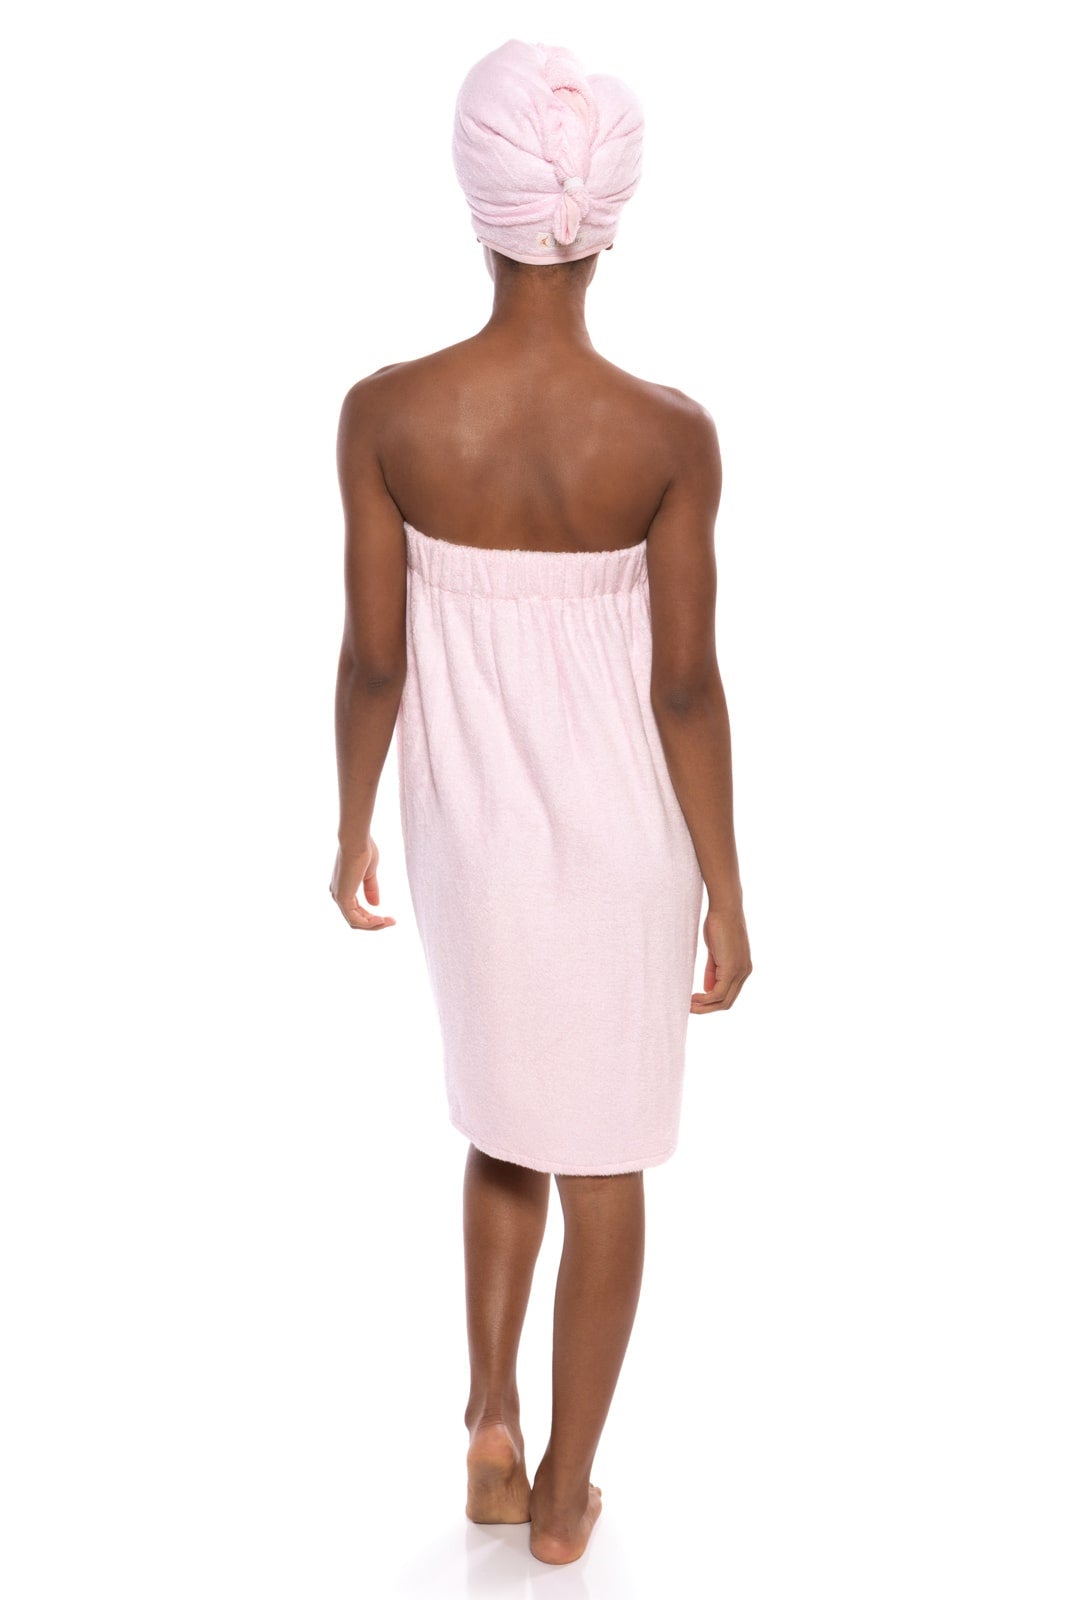 Women's Terry Cloth Spa Package - Body Wrap and Hair Towel | Fishers Finery